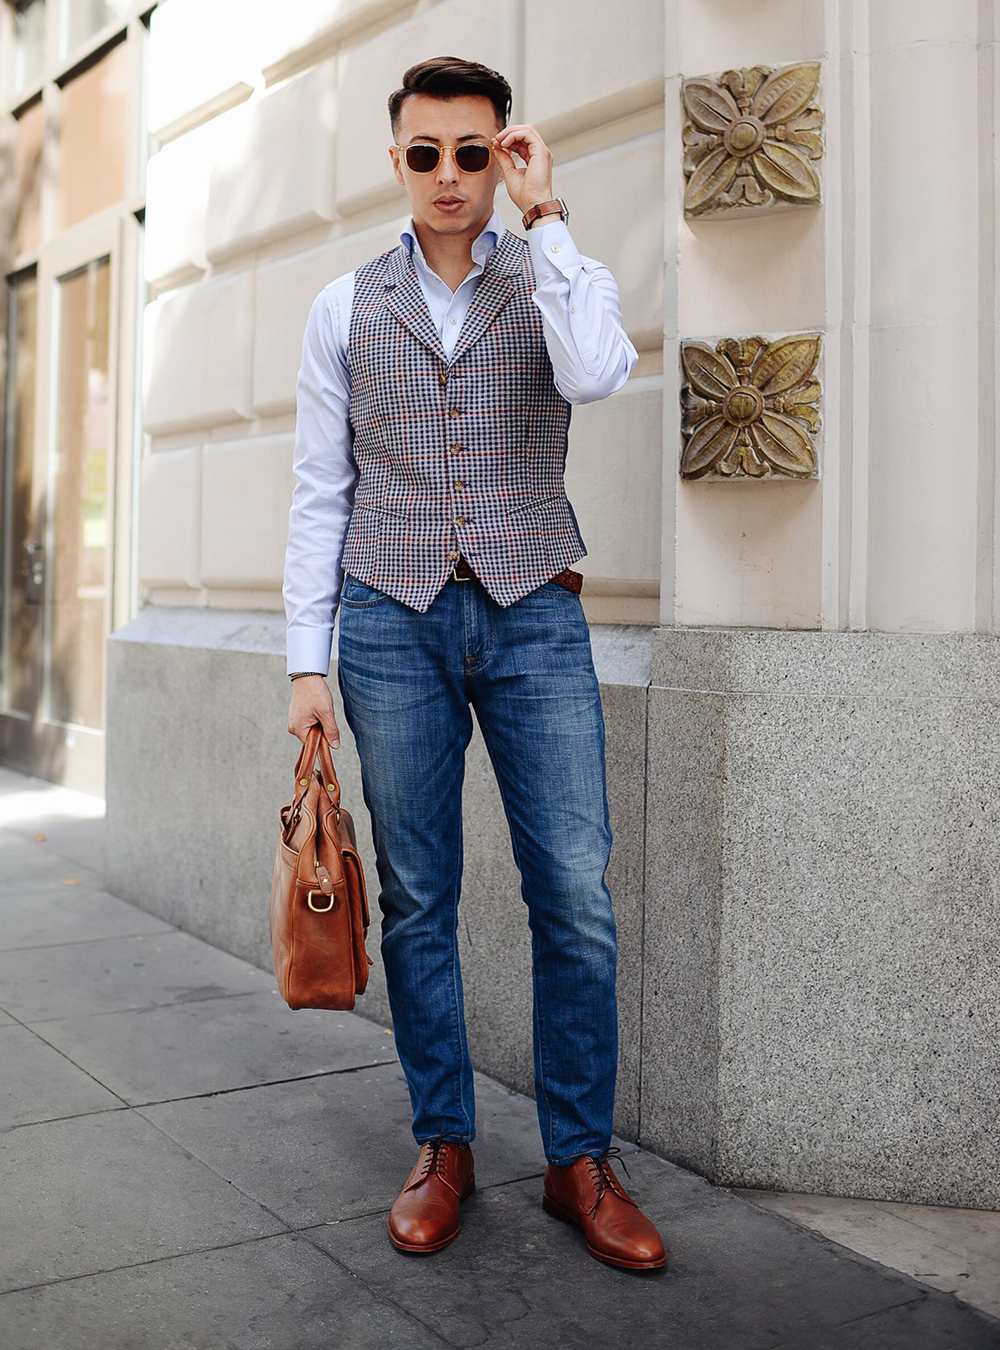 grey vest, white shirt, blue jeans, and brown Derby shoes